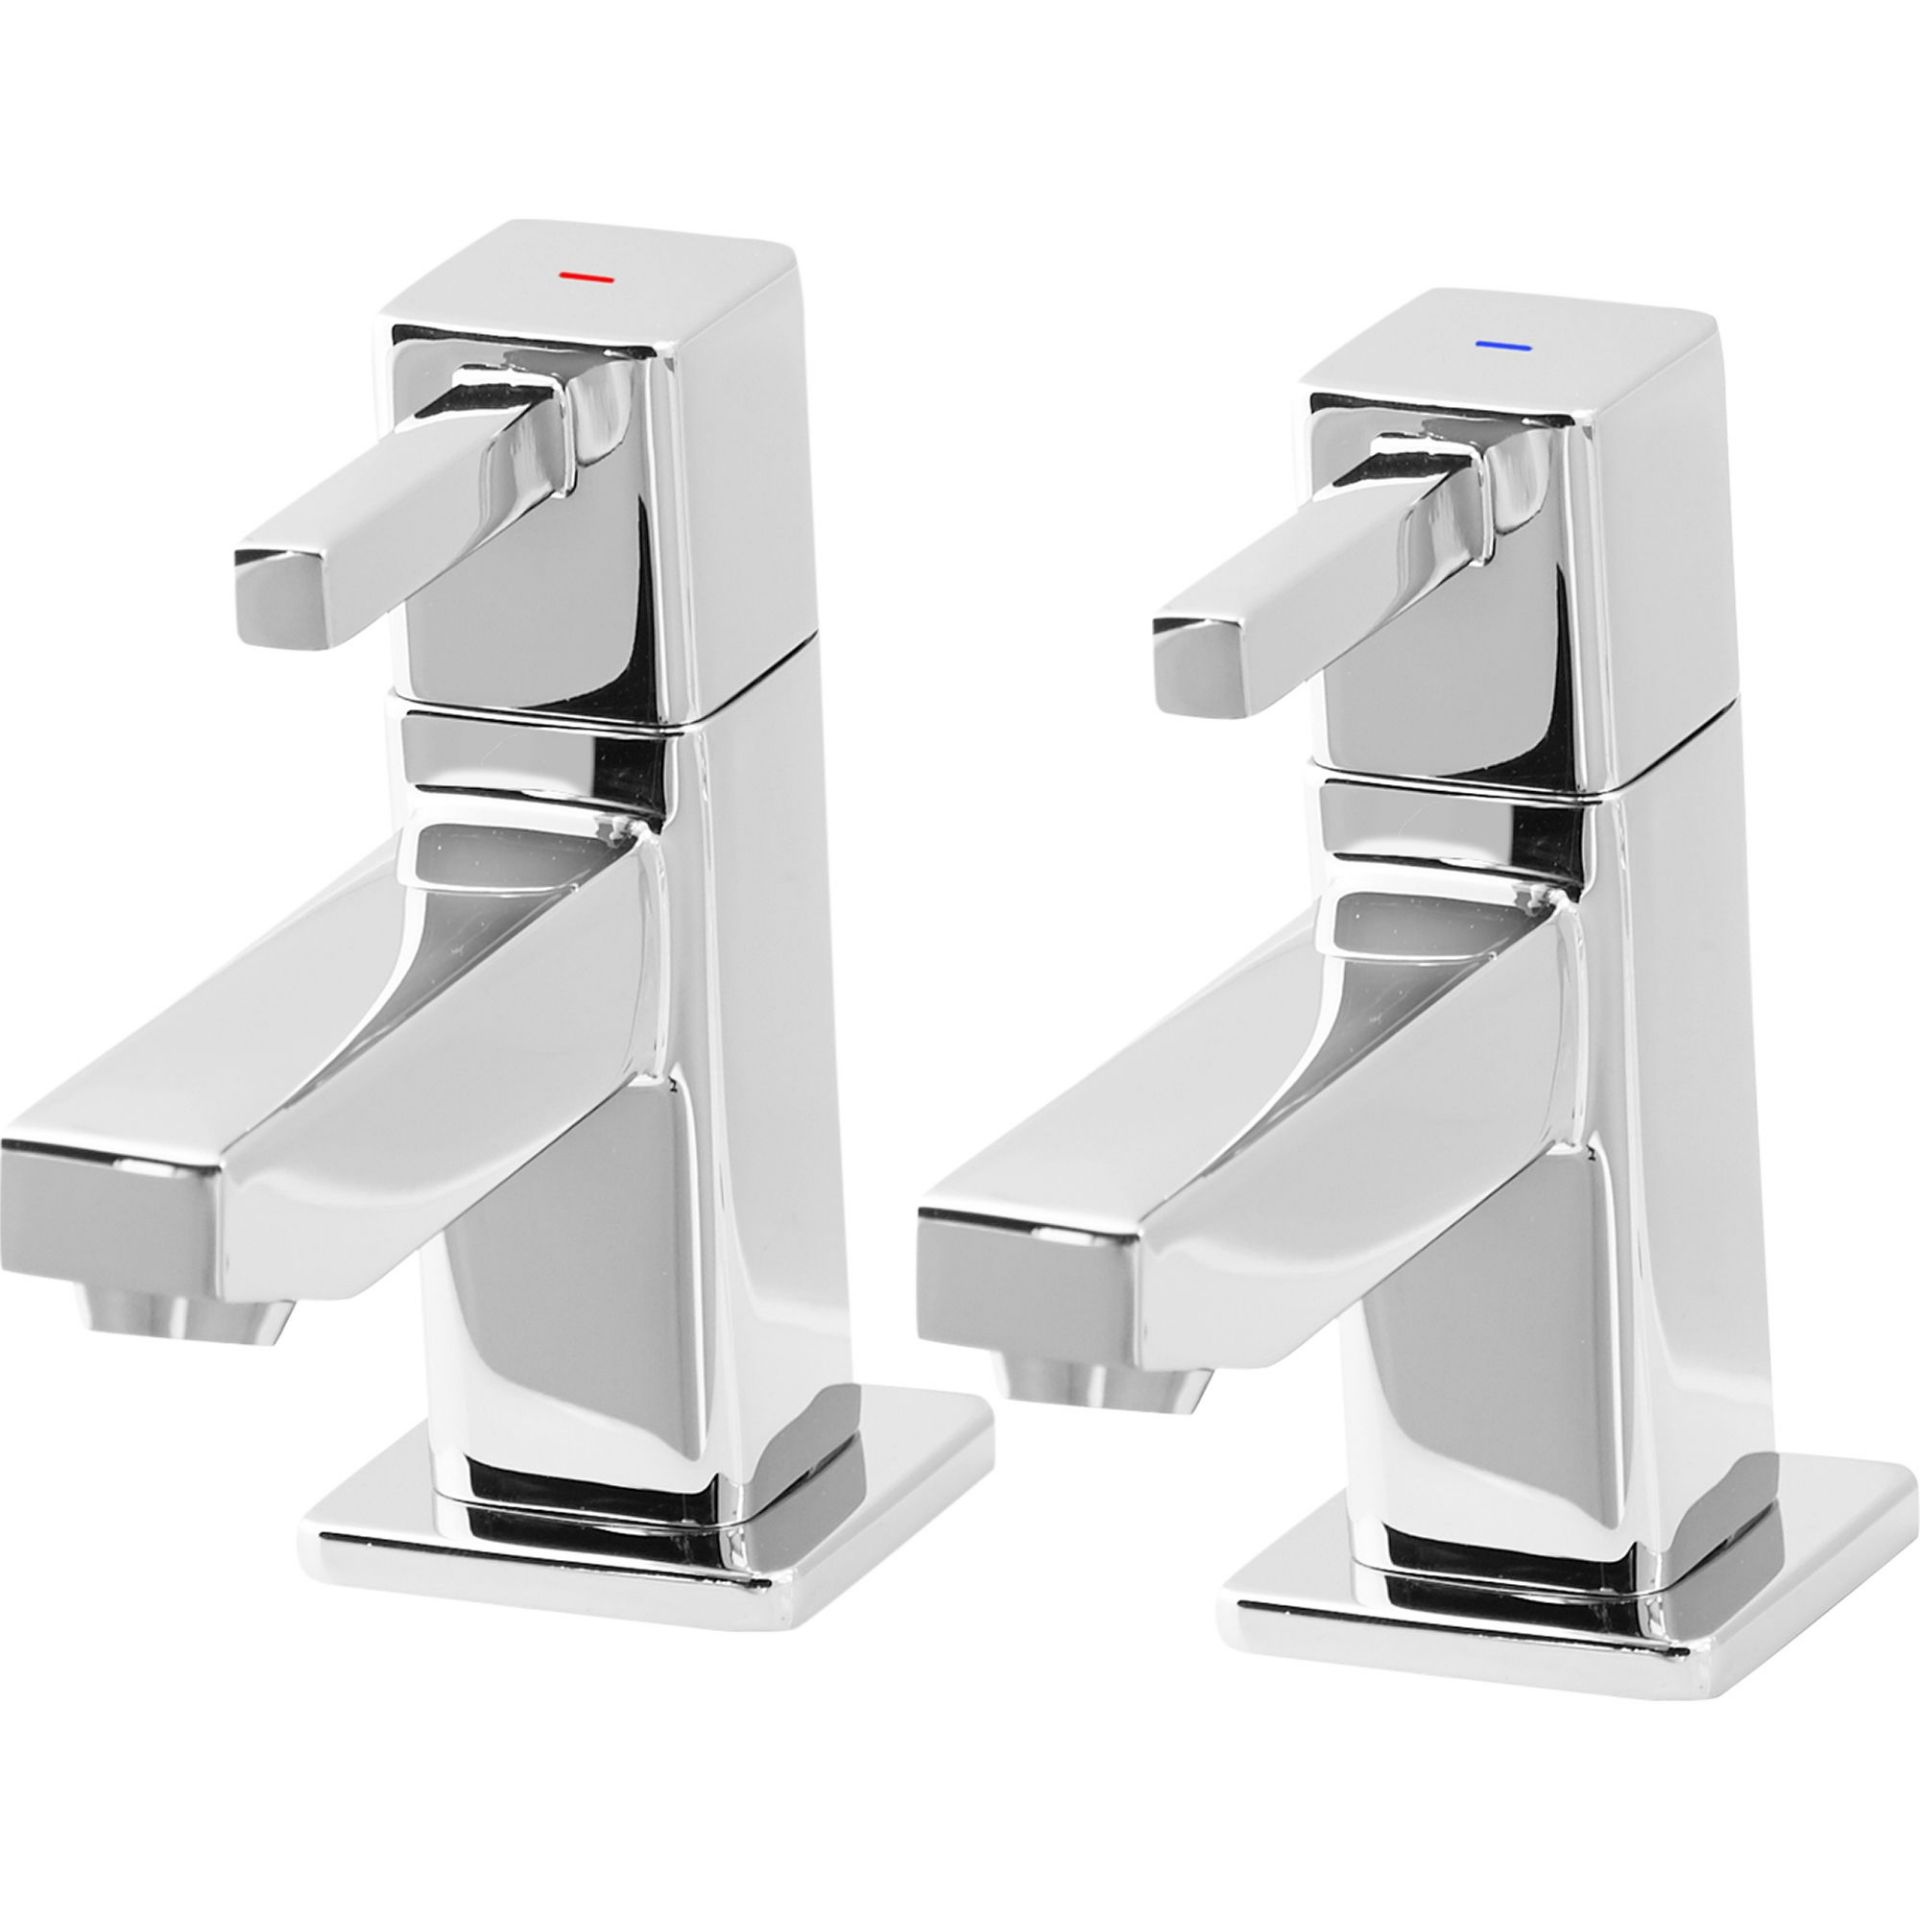 (AQ22) Cooleen Basin Pillar Tap. This modern style chrome basin tap from the Cooleen collection...